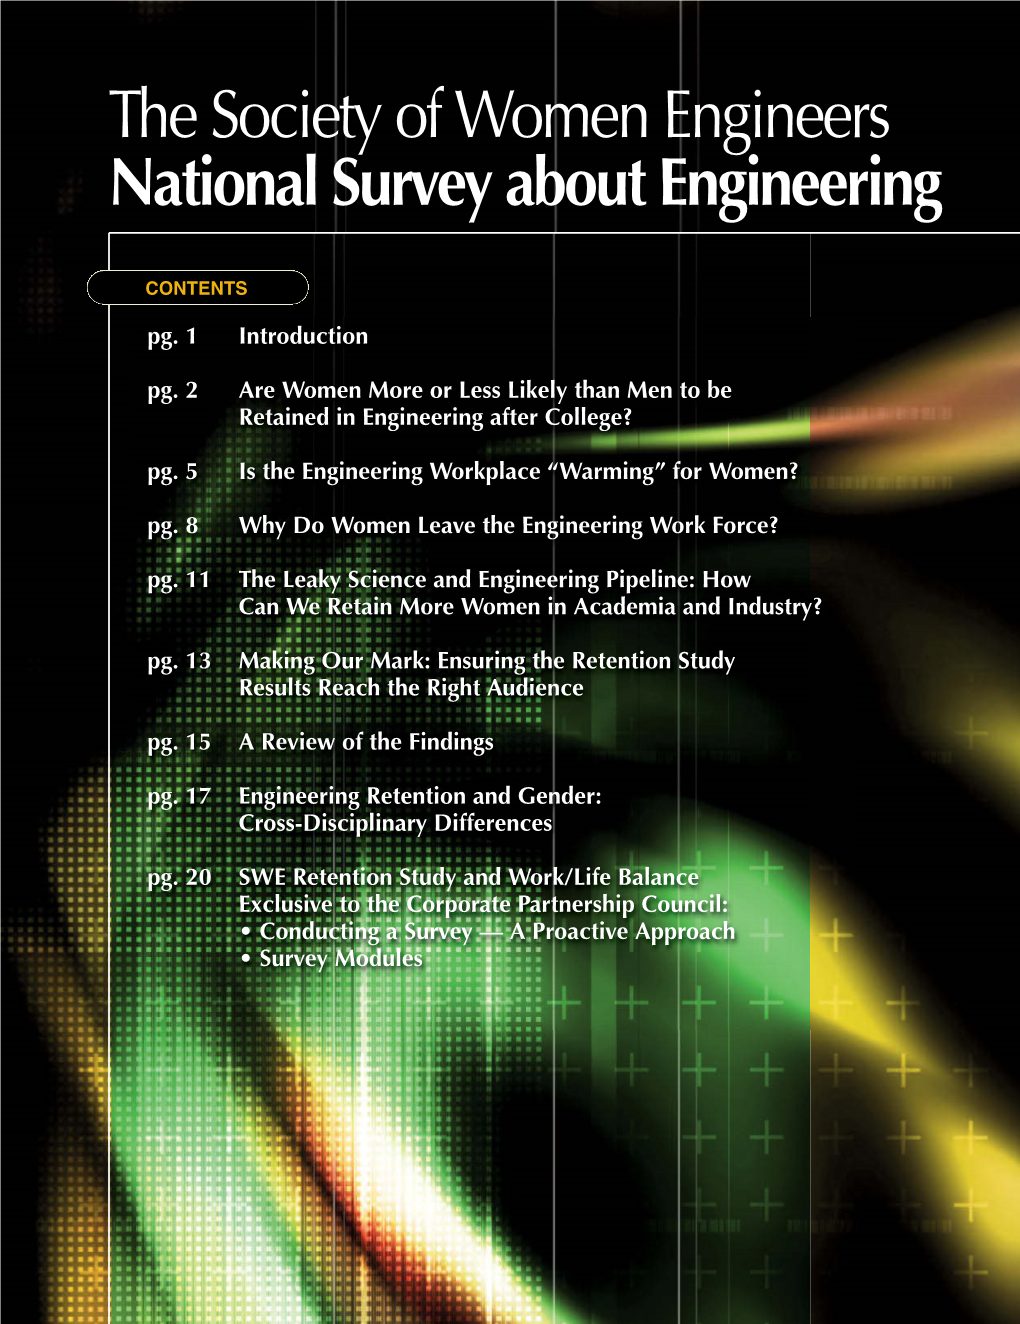 The Society of Women Engineers National Survey About Engineering